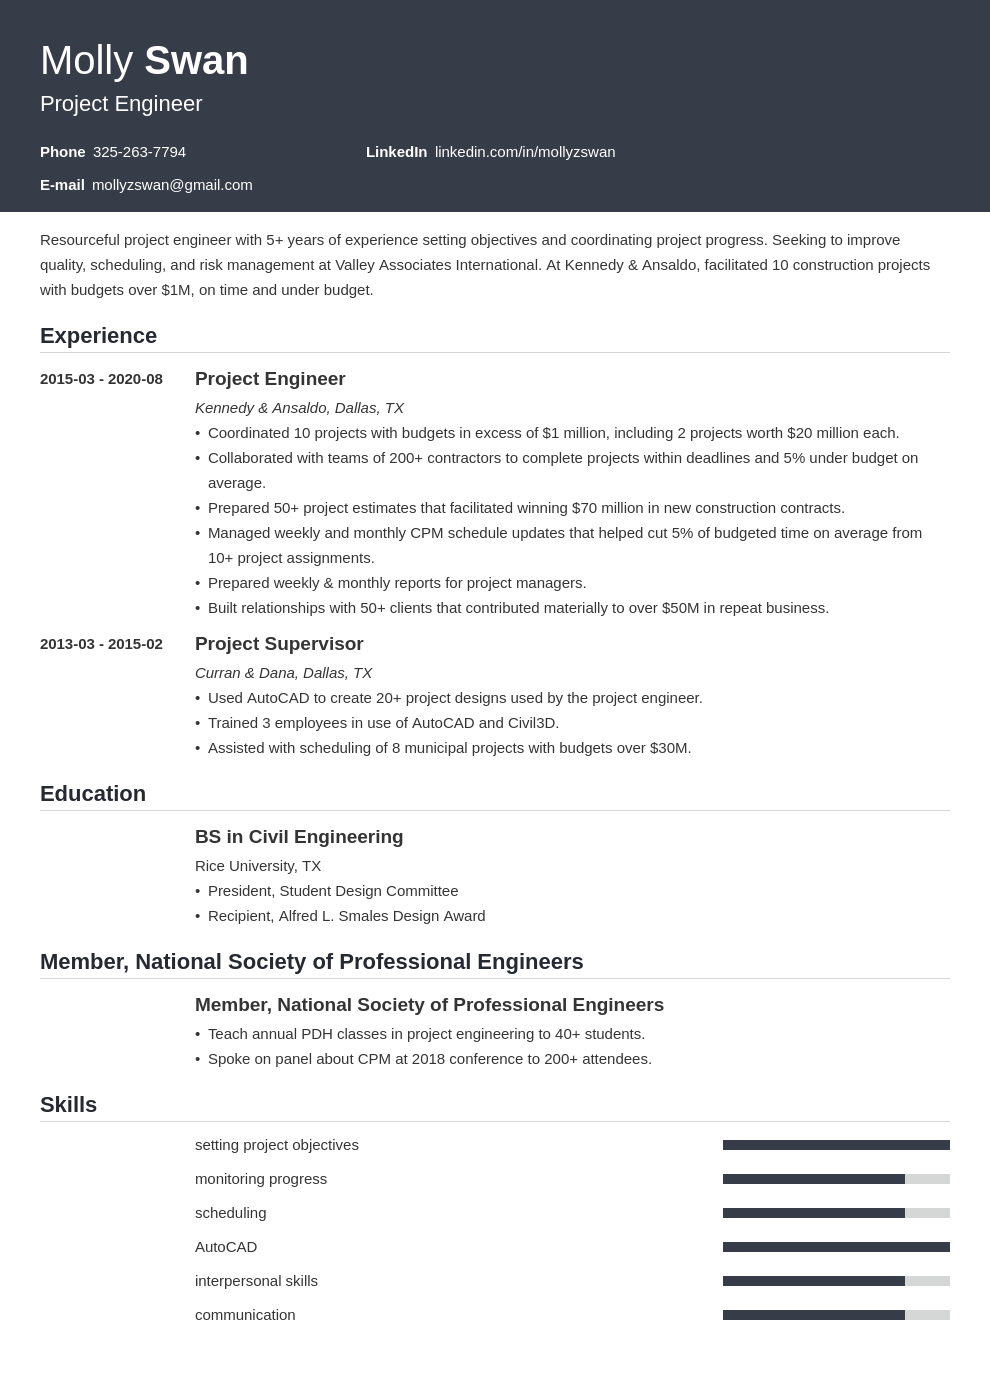 Project Engineer Resume: Examples & Guide [10+ Tips]